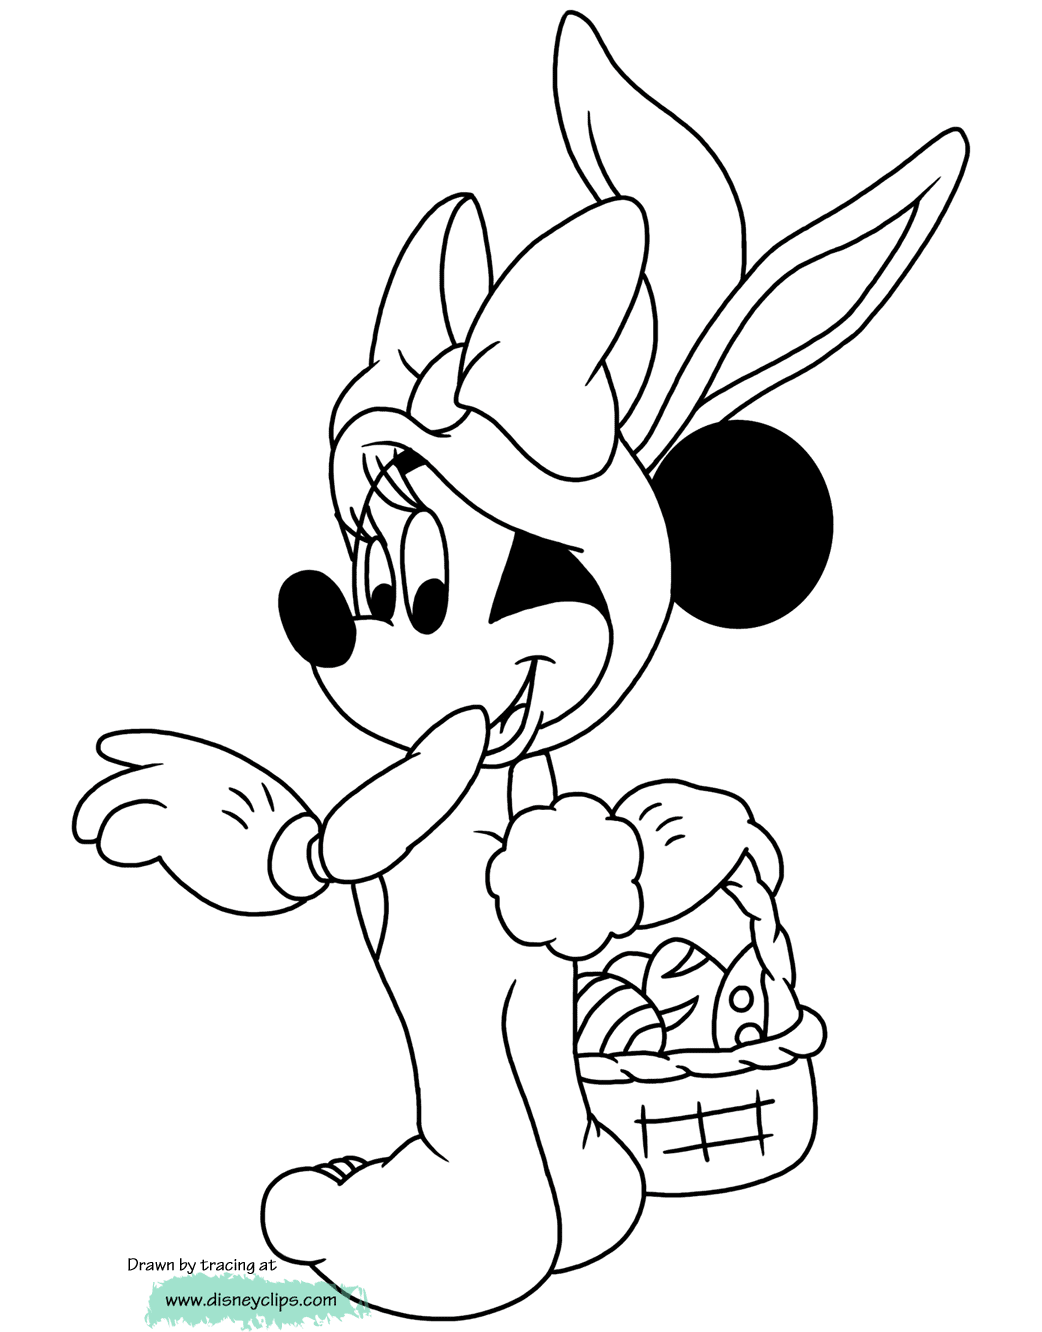 Printable Disney Easter Coloring Pages 2   Disneyclips.com